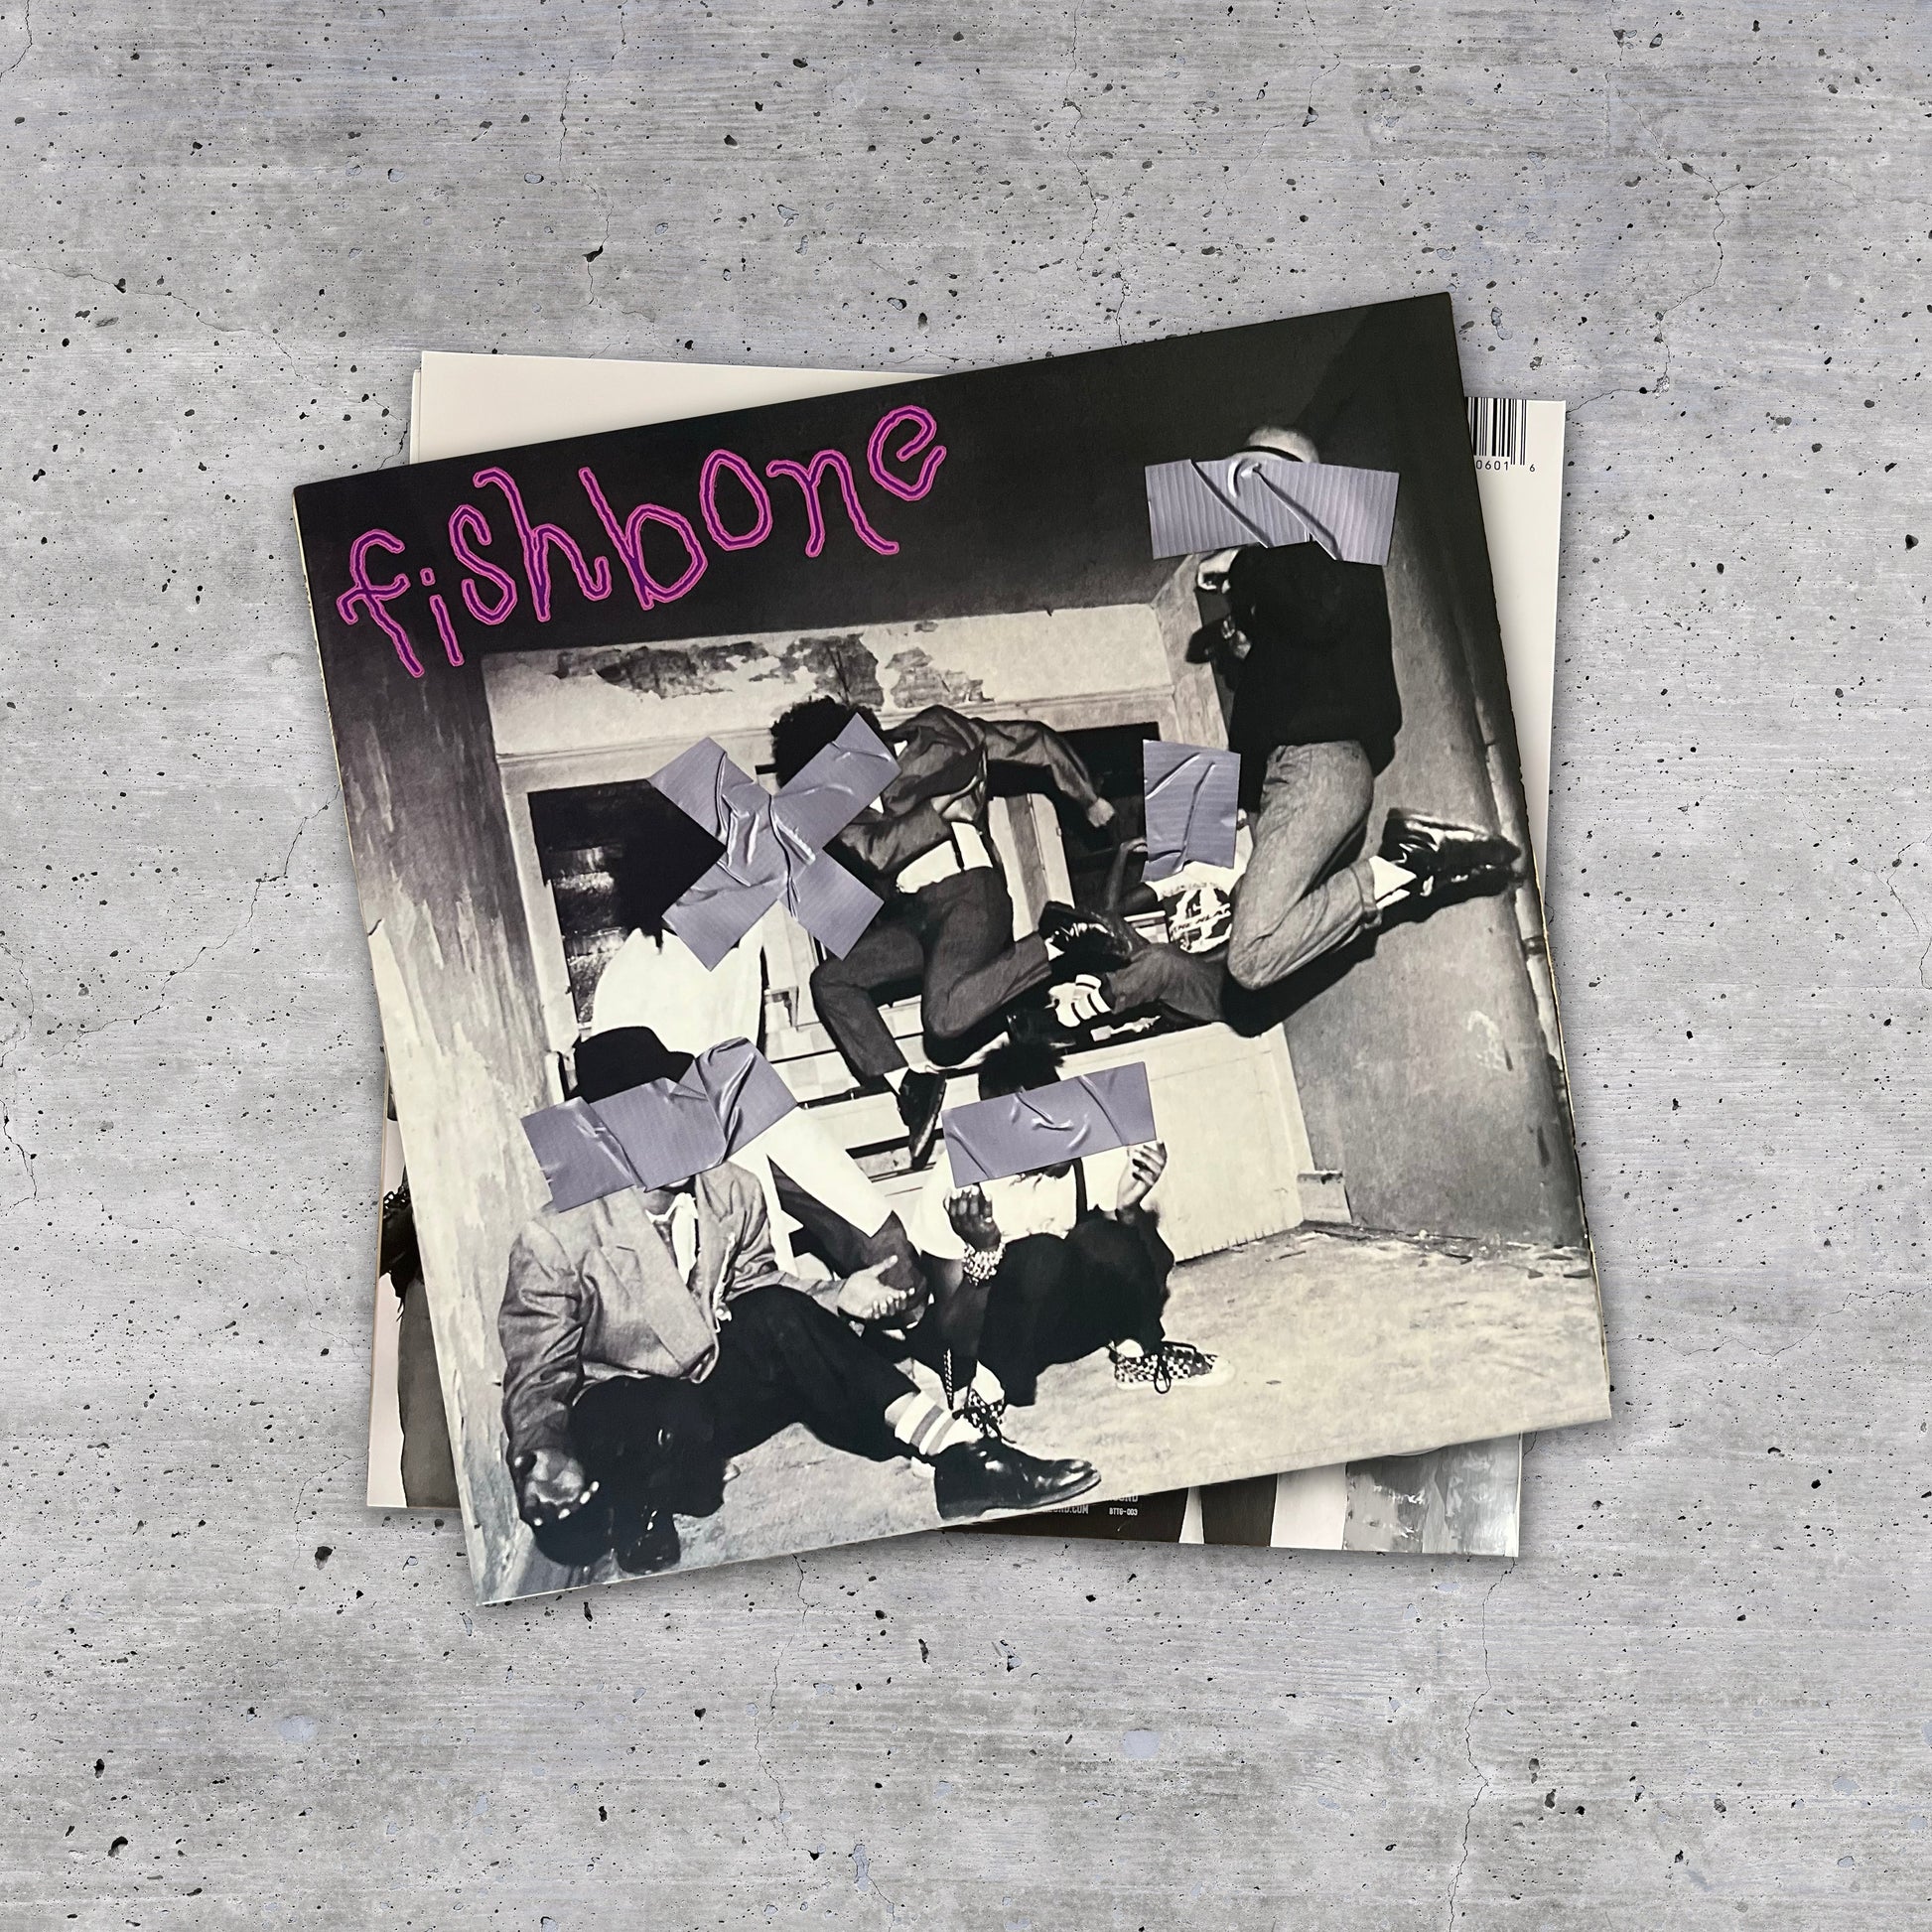 Live at the temple bar and more by Fishbone, CD with bdzik43 - Ref:119860911